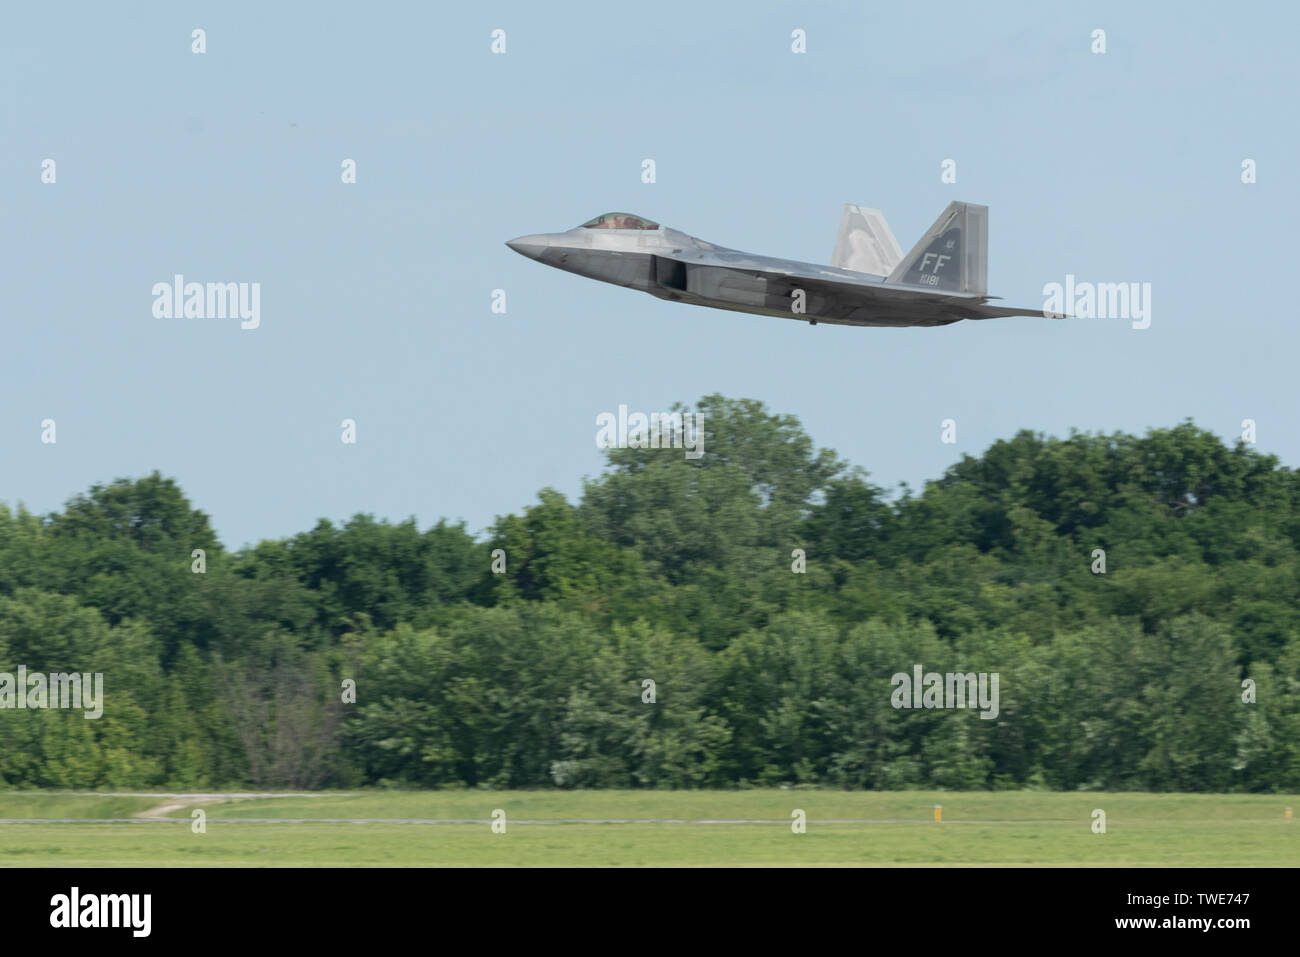 U.S. Air Force Maj. Paul 'Loco' Lopez, F-22 Demo Team commander/pilot, performs a touch-and-go before landing at Whiteman Air Force Base, Mo. for the Wings Over Whiteman Air Show, June 15, 2019. Celebrating the 30th anniversary of the B-2 Spirit, the show brought in over 120,000 spectators throughout the weekend. (U.S. Air Force photo by 2nd Lt. Samuel Eckholm) Stock Photo